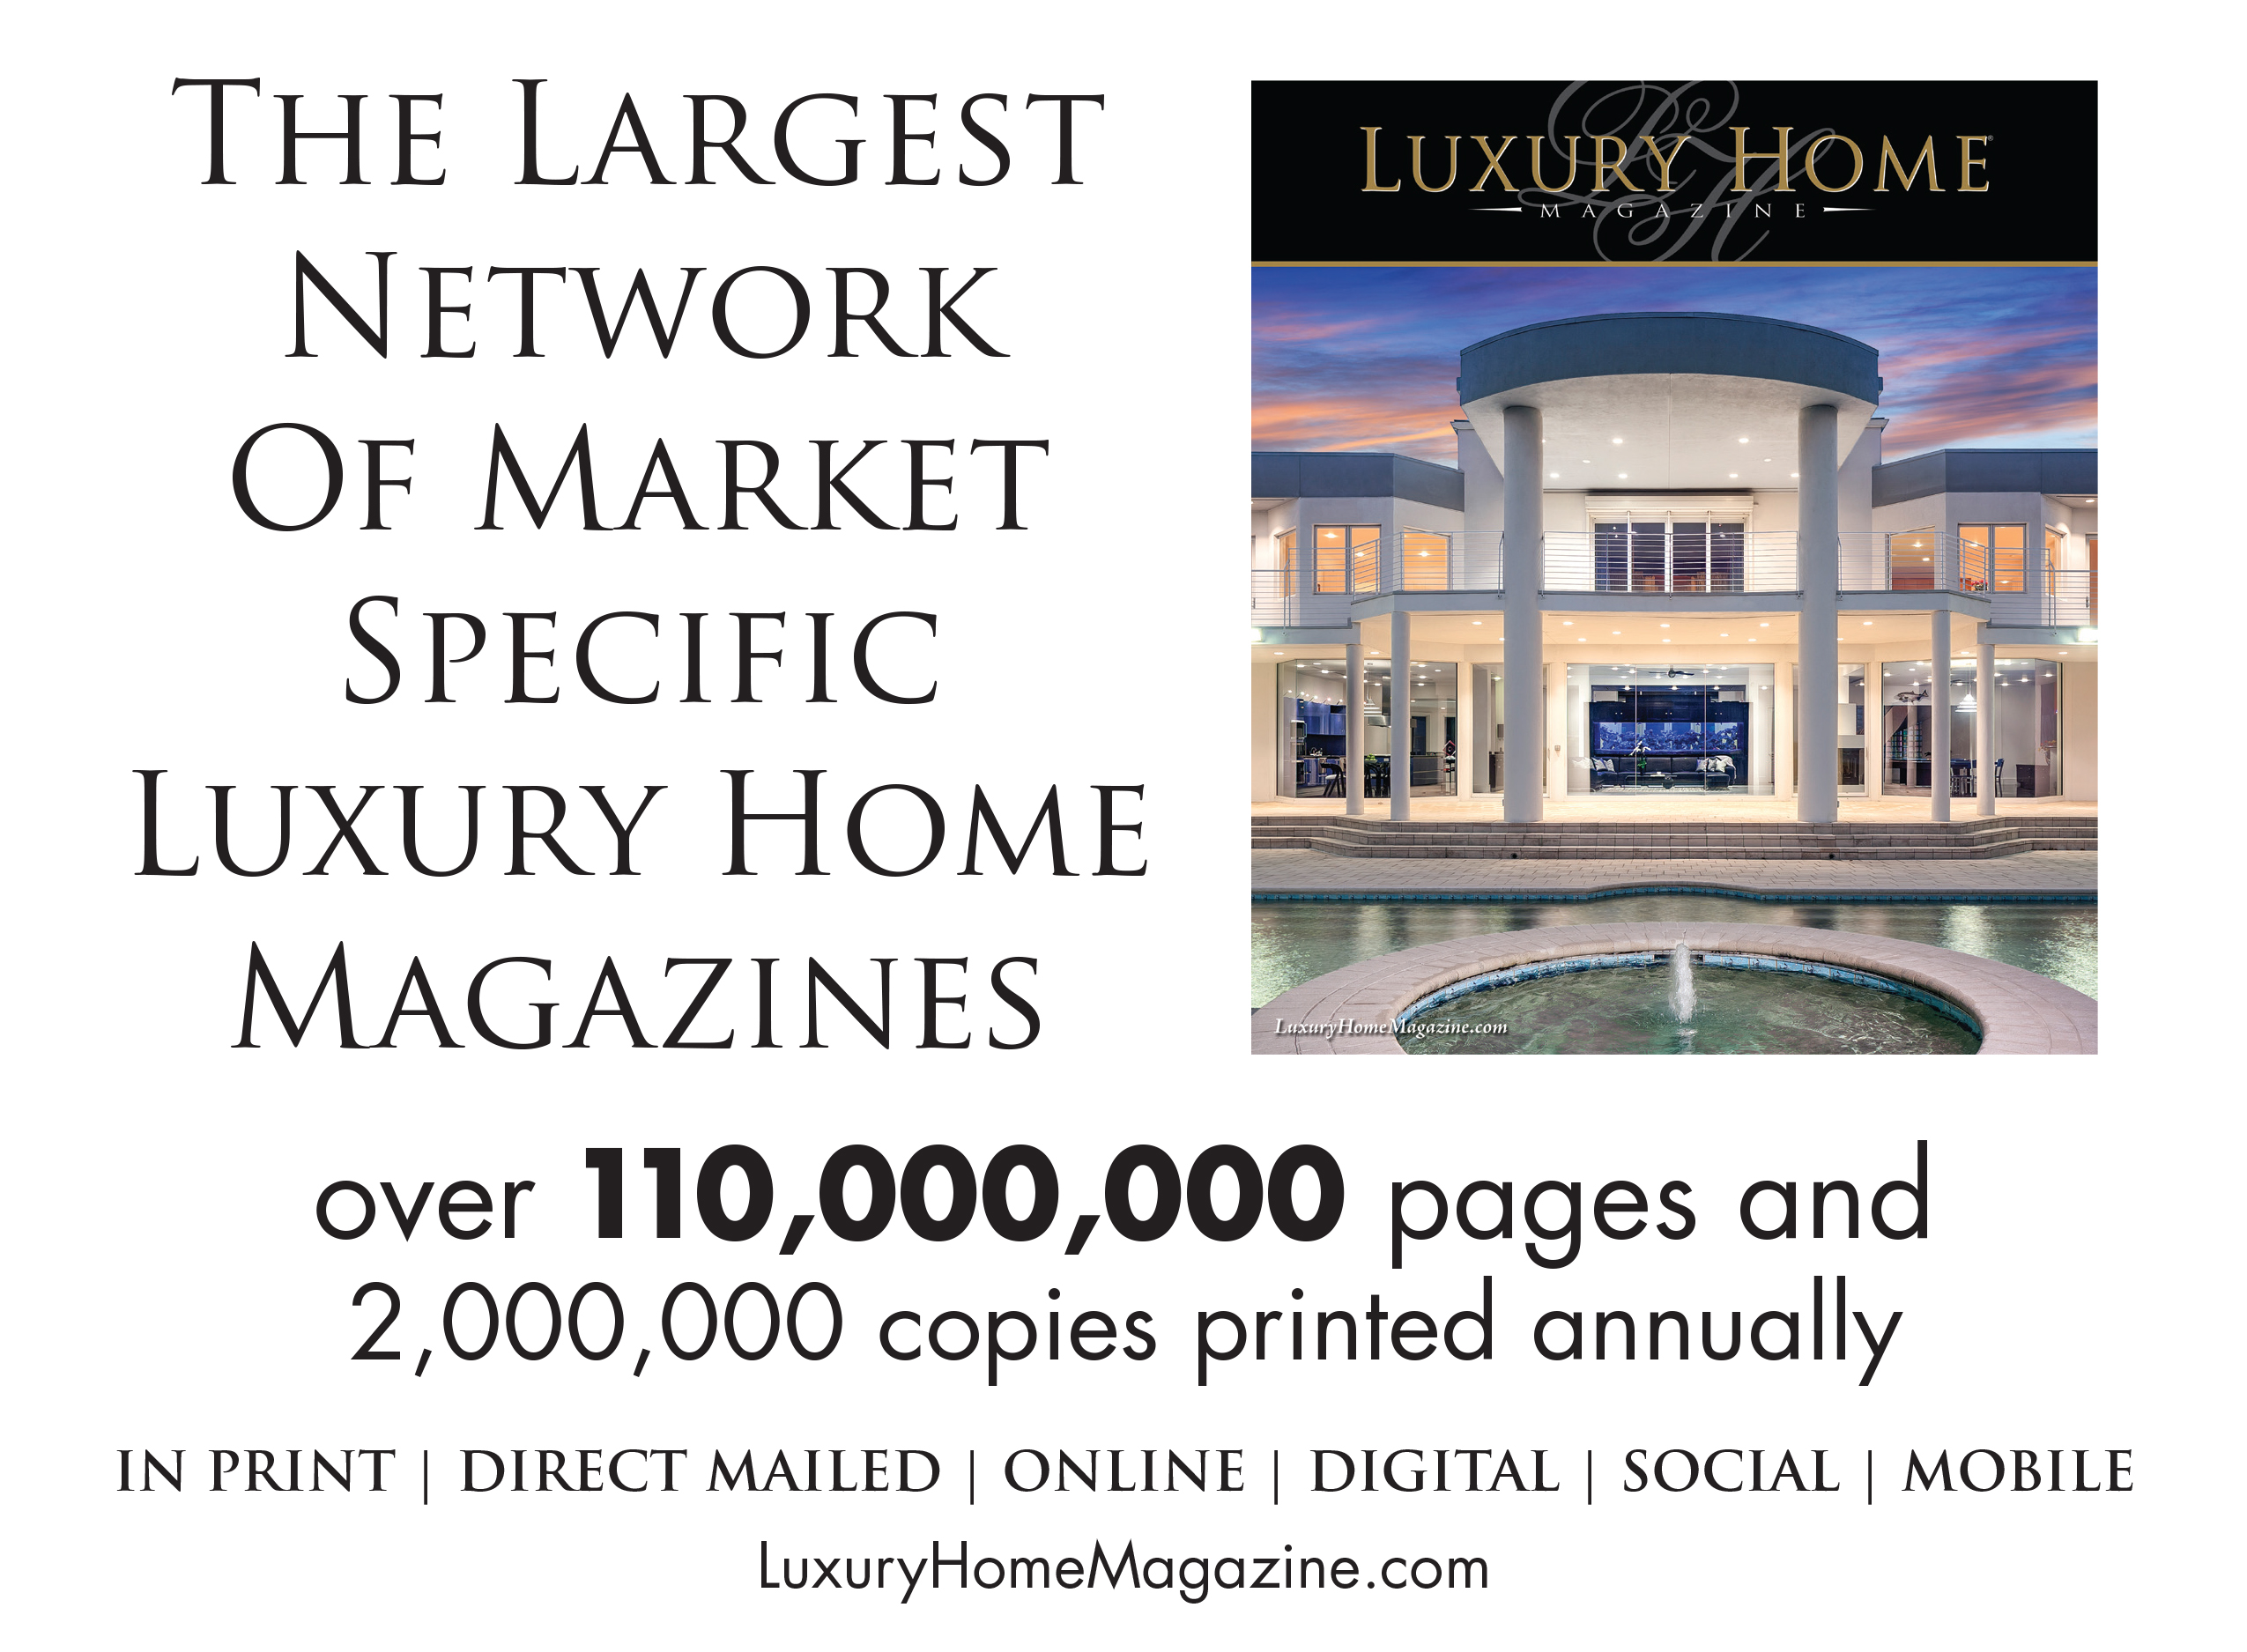 The Largest Network of Market Specific LHM's